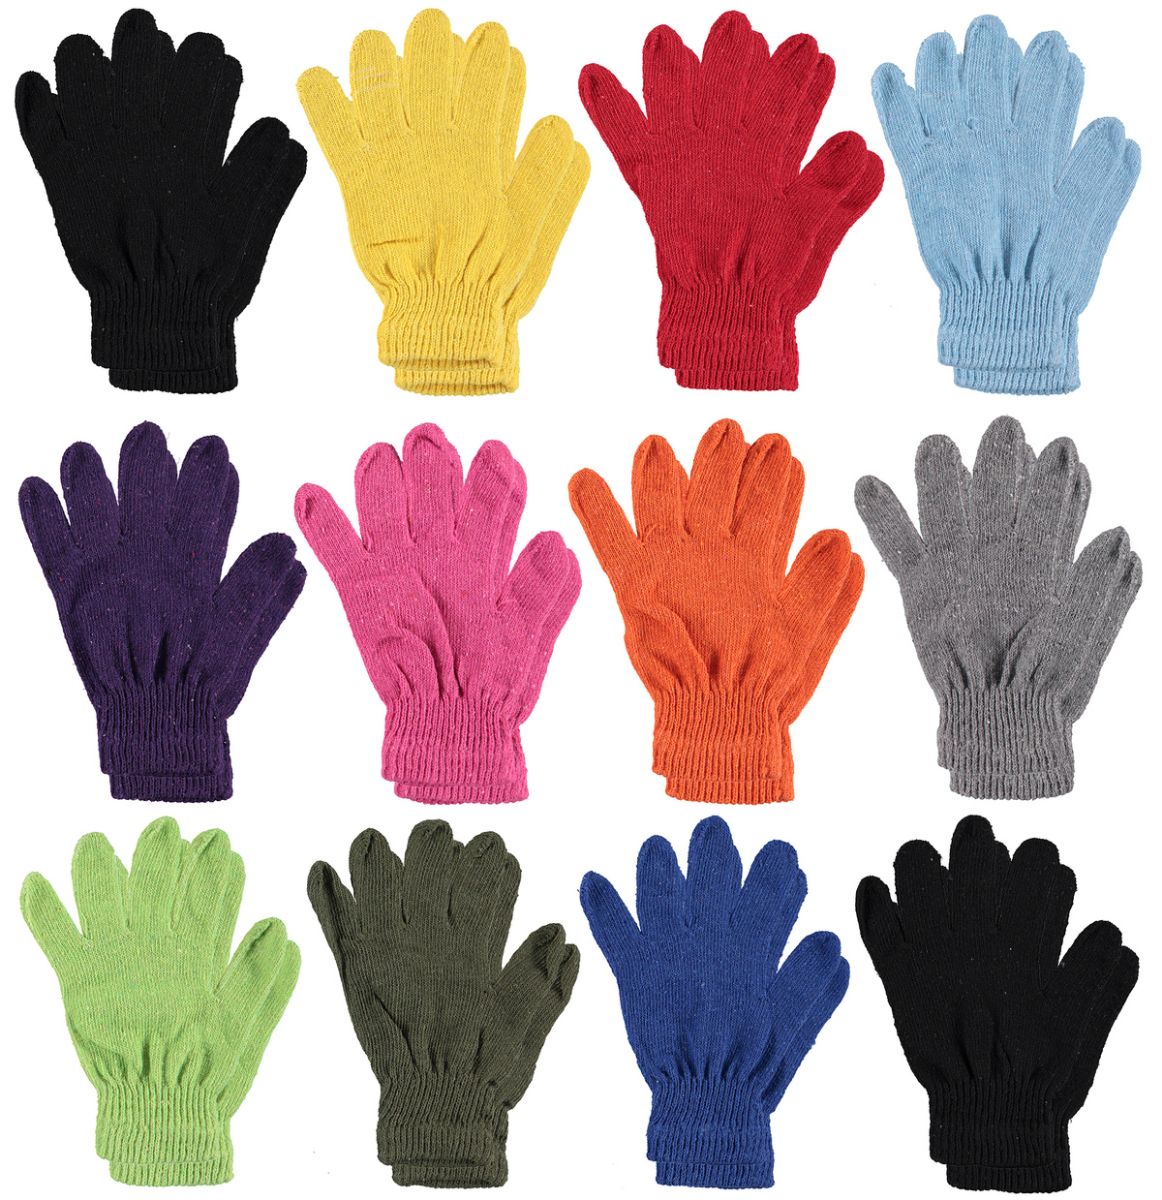 120 Pairs Yacht & Smith Kids Warm Winter Colorful Magic Stretch Gloves Ages 2-8 Bulk Pack - Kids Winter Gloves